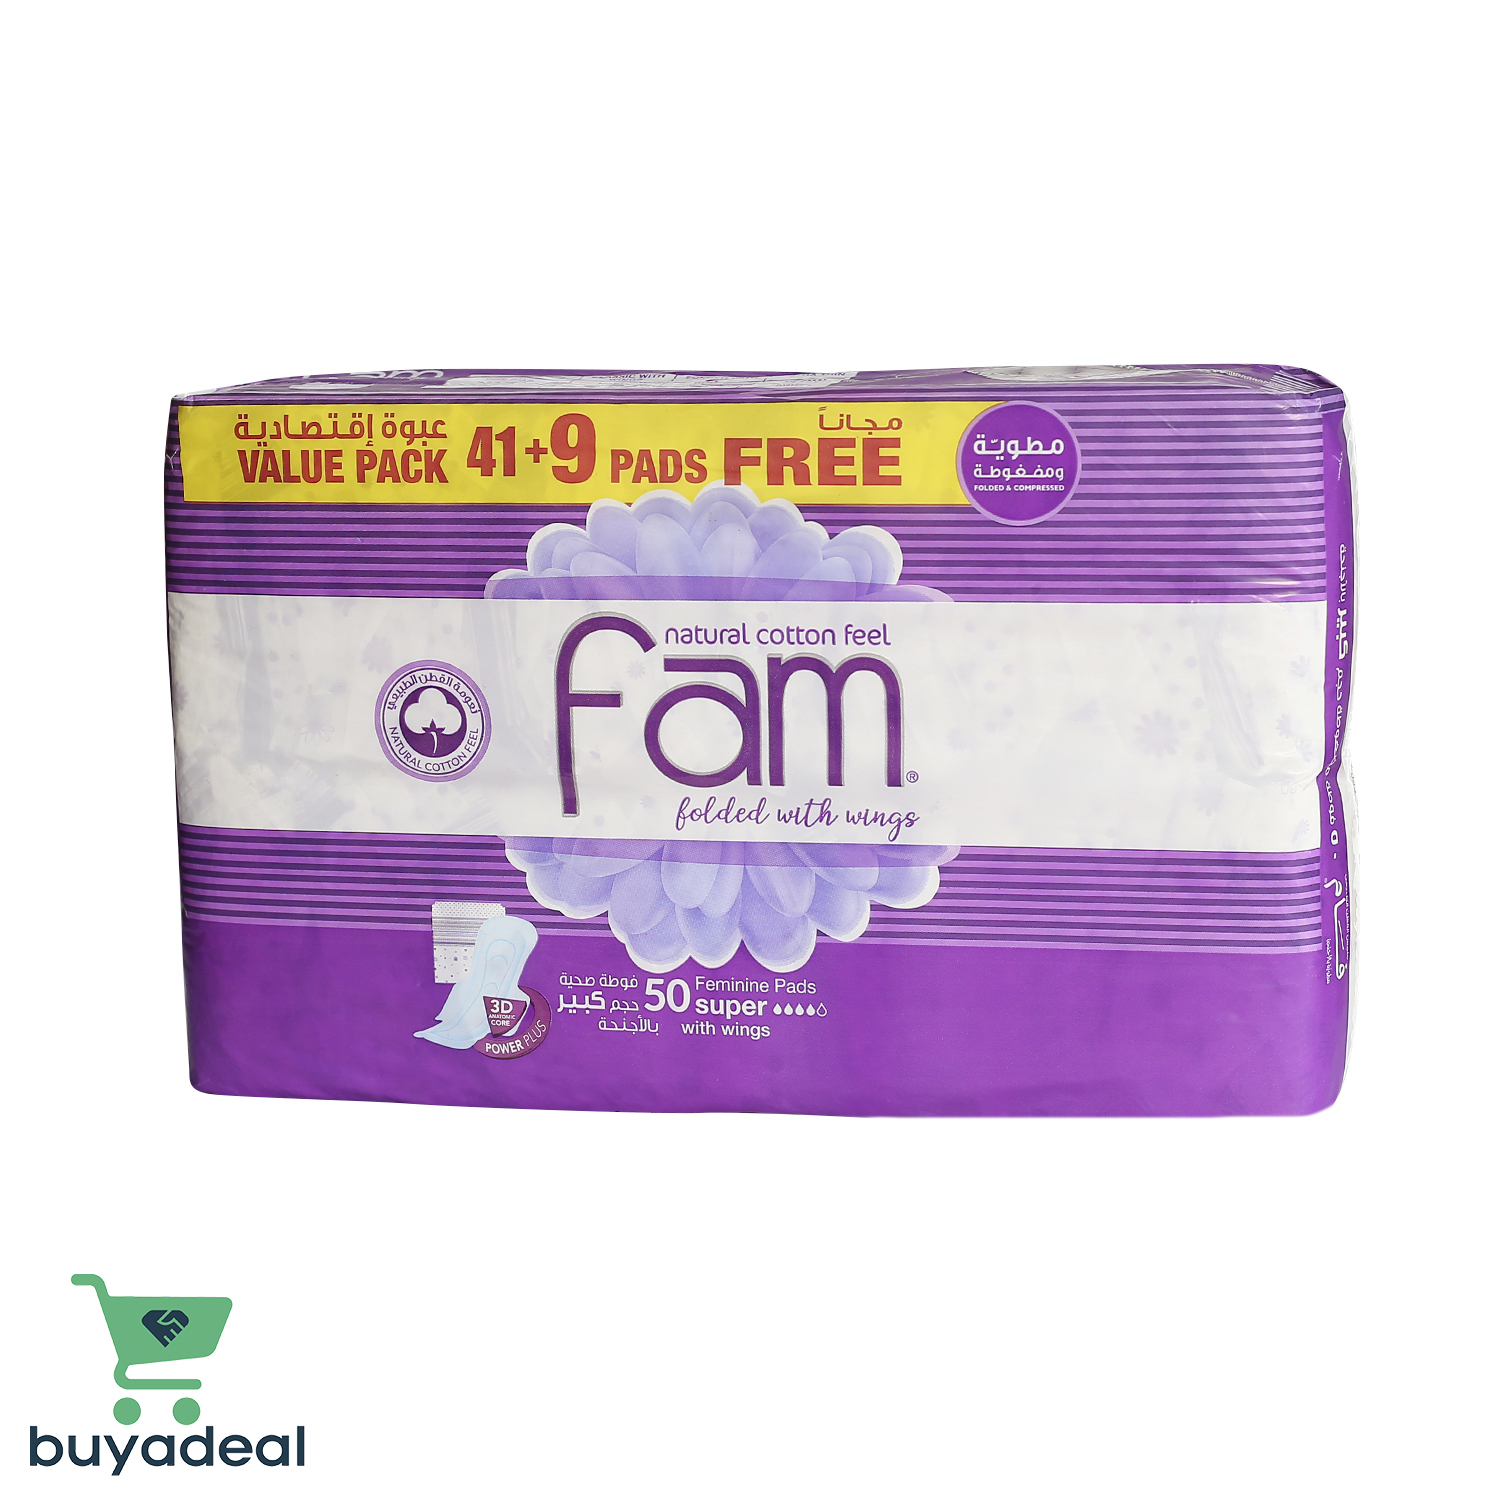 Buyadeal Product Fam Sanitary Pads Maxi Folded With Wings Super - 40 Pads